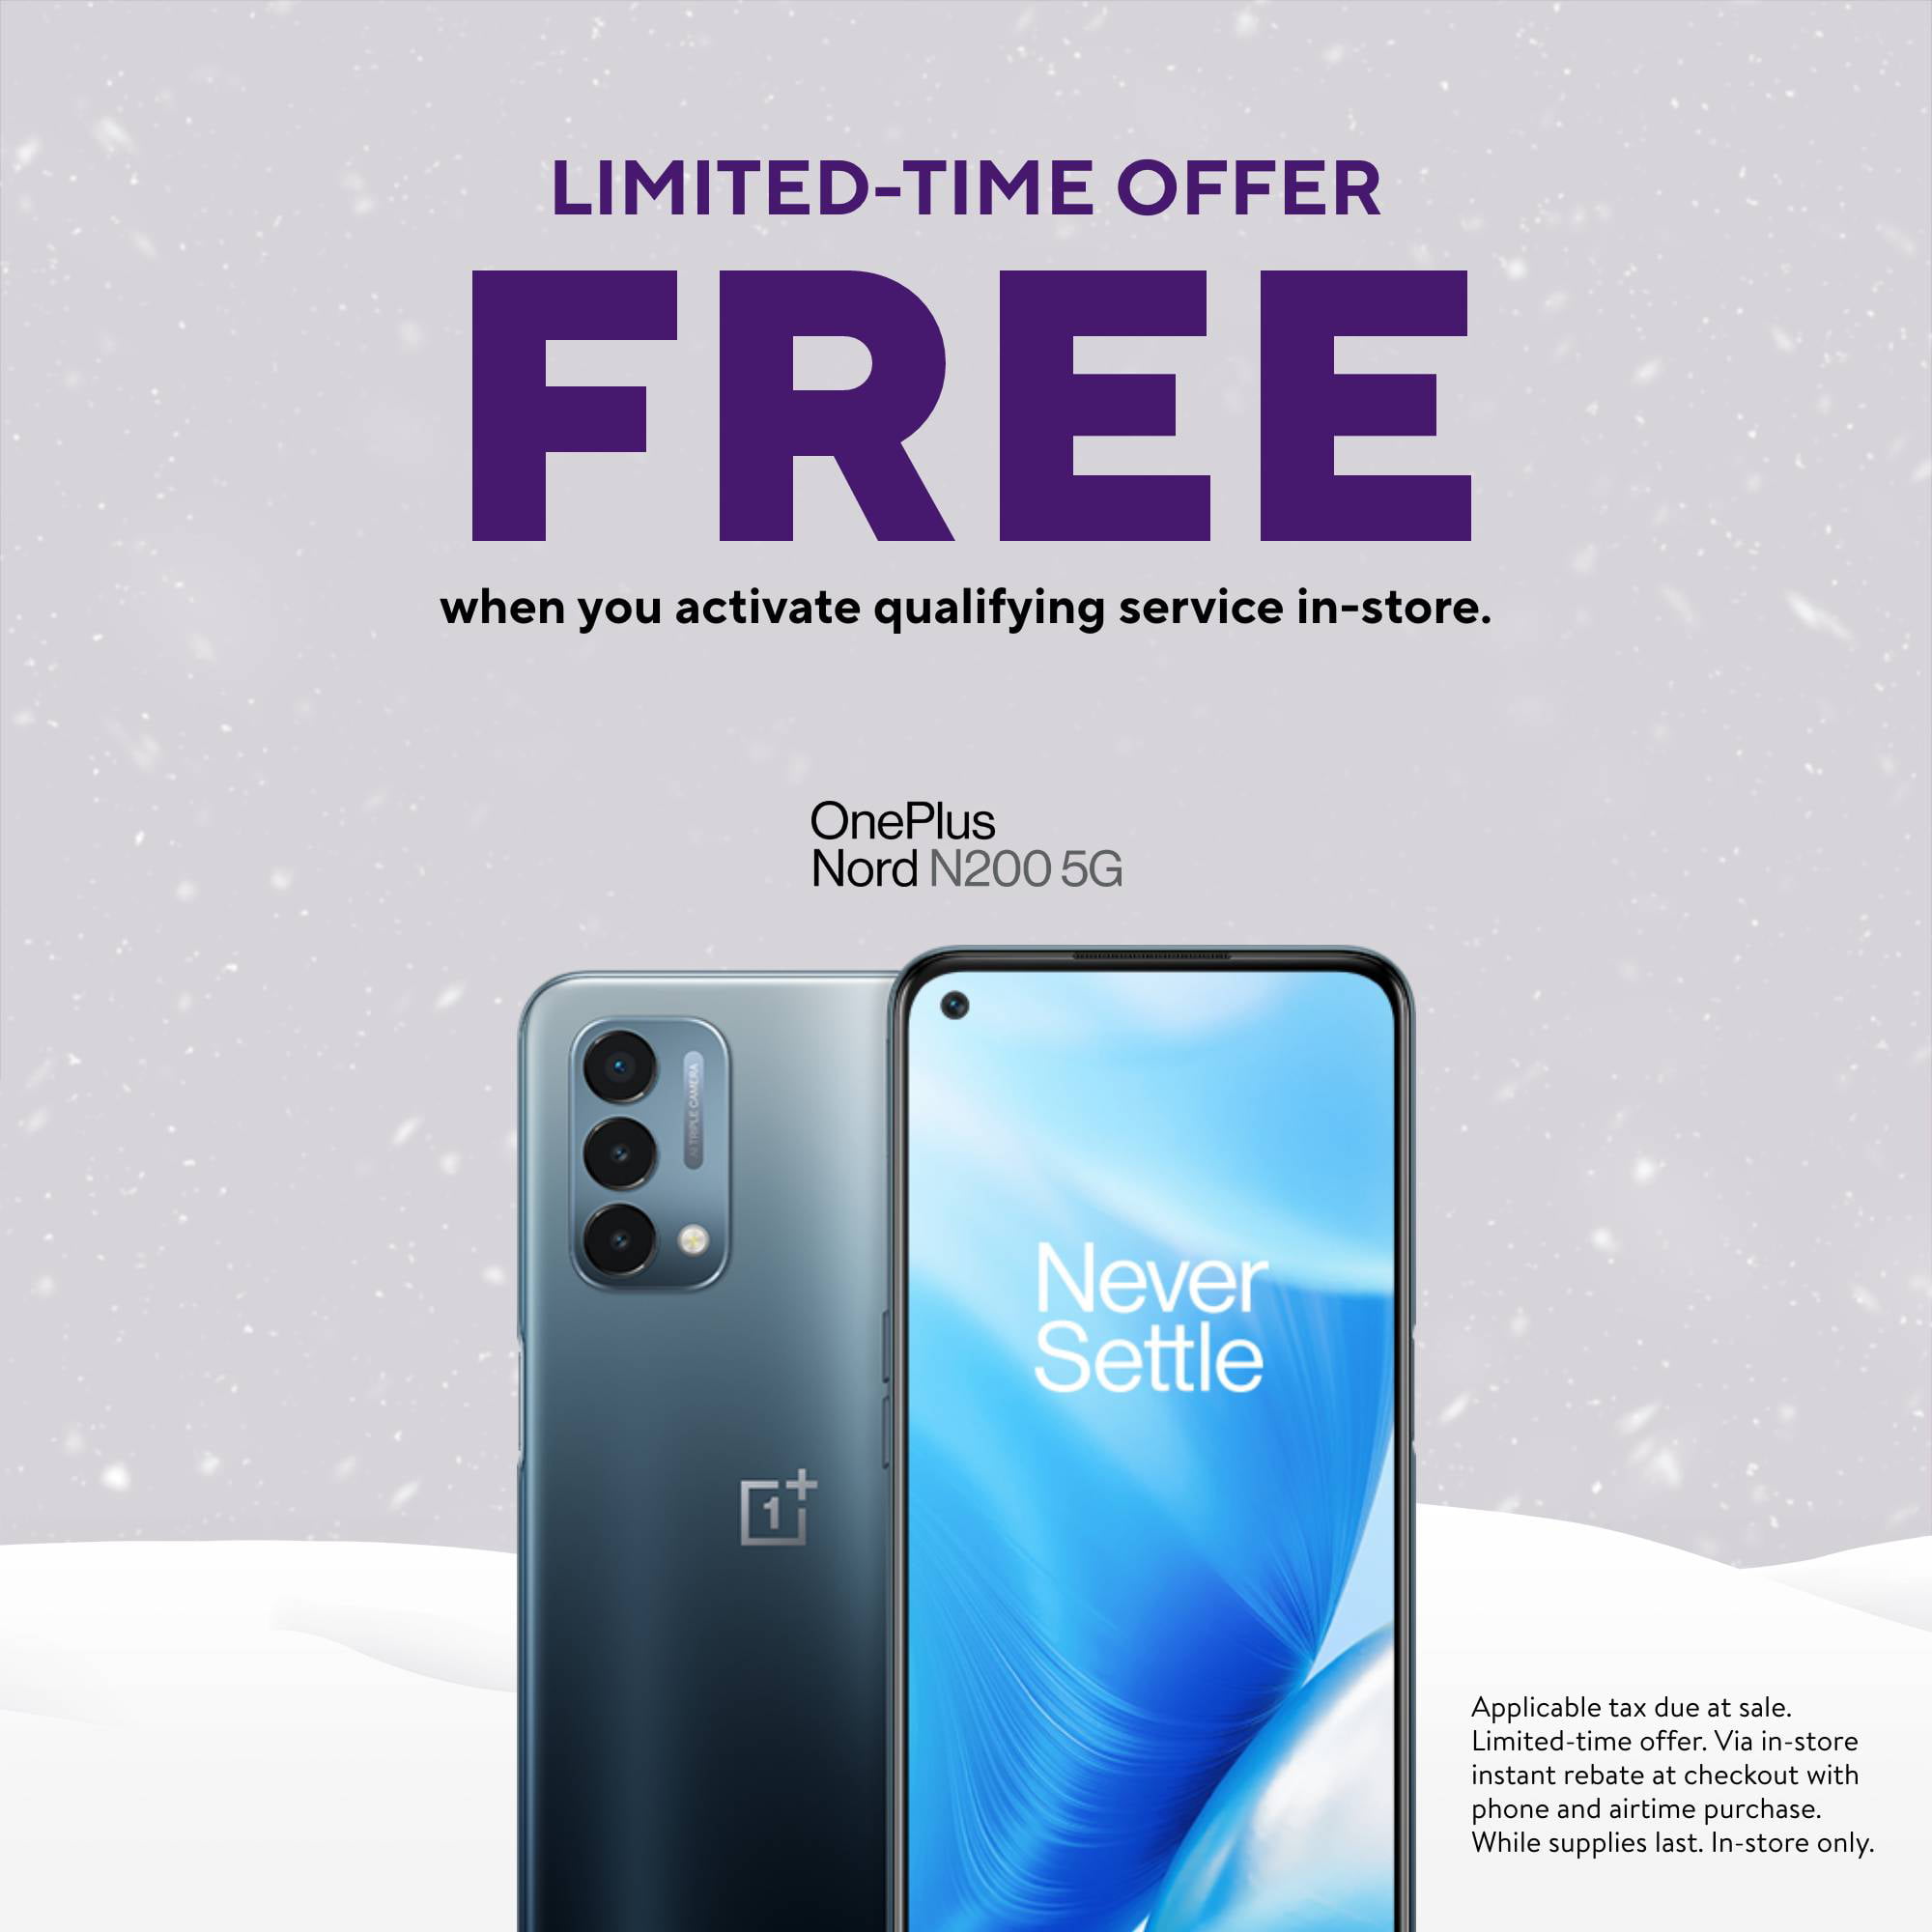 Metro by T-Mobile OnePlus Nord N200, 5G Prepaid Smartphone FREE after activation